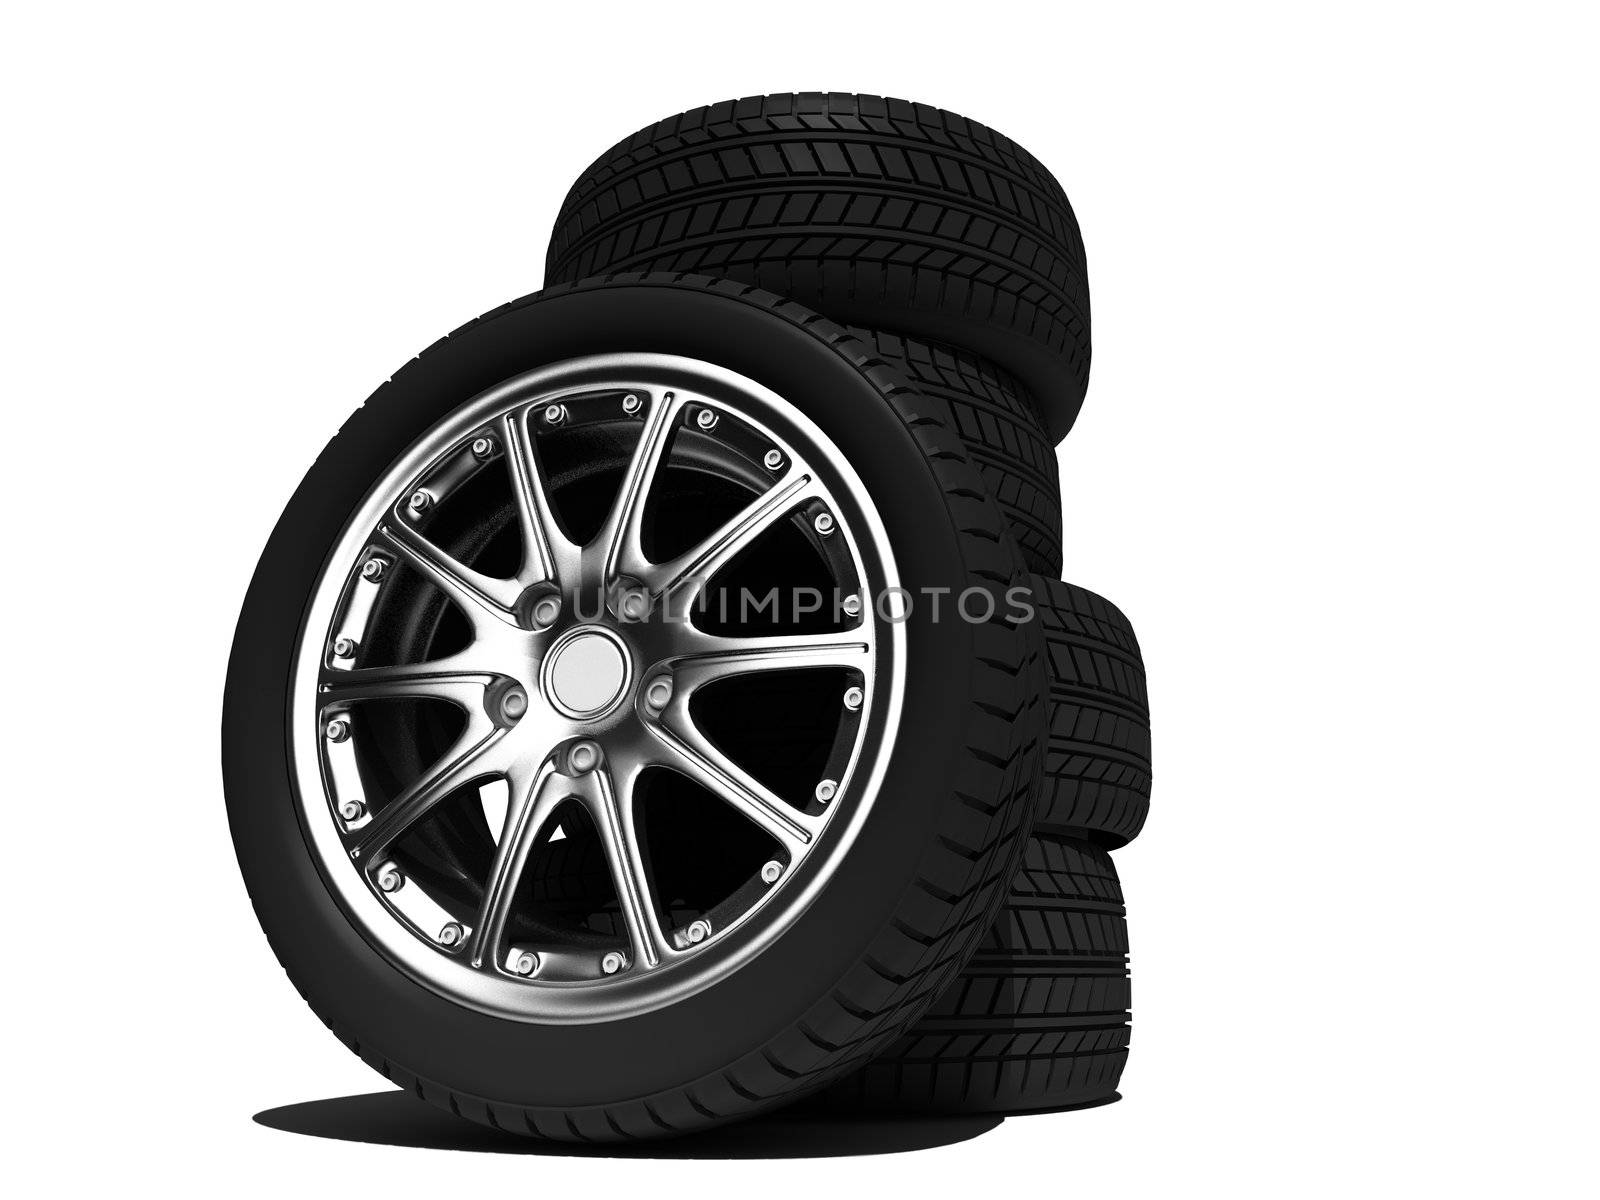 wheels with steel rims over the white background